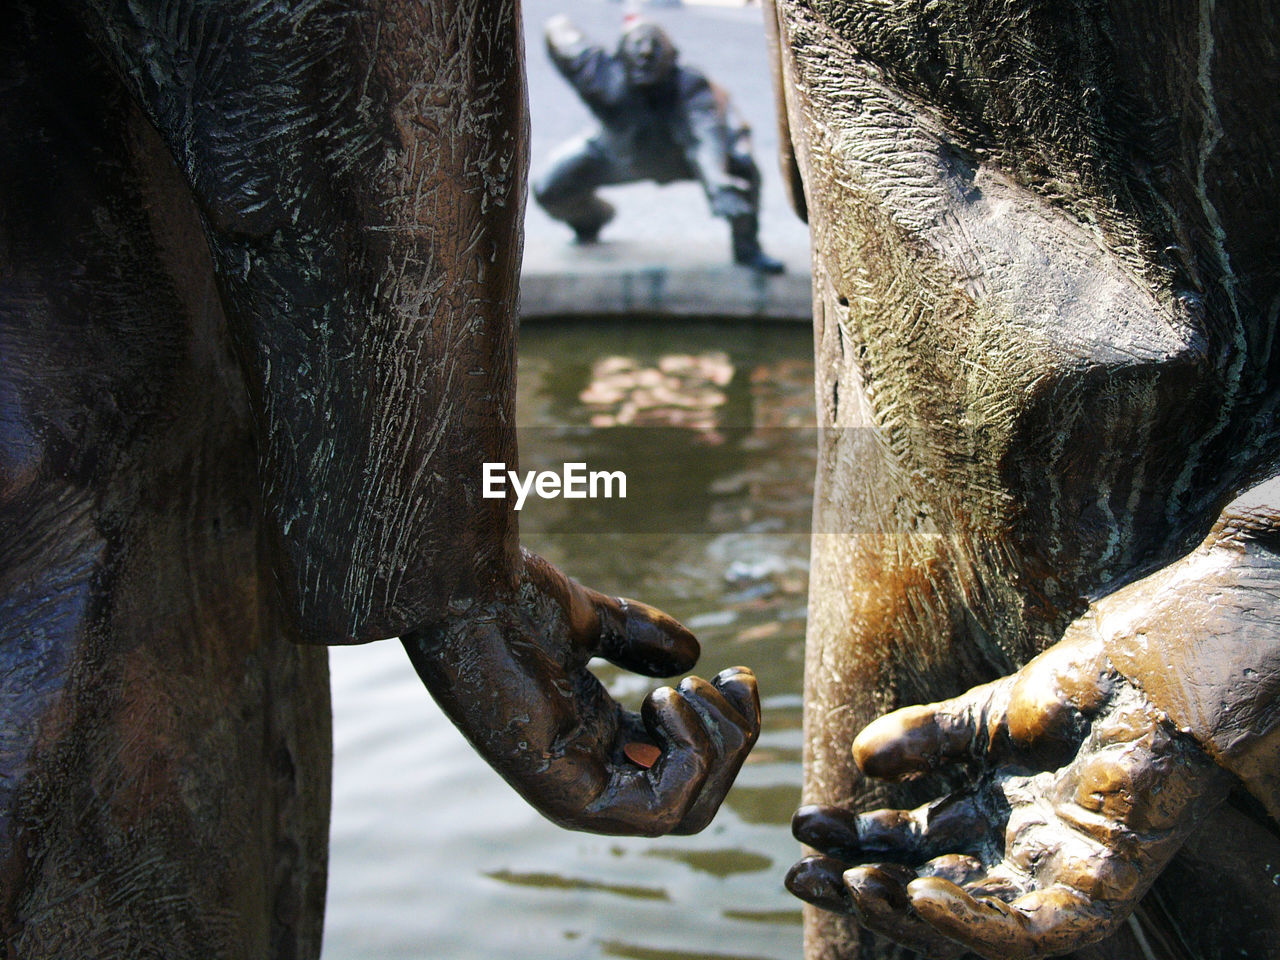 CLOSE-UP OF HAND BY ELEPHANT